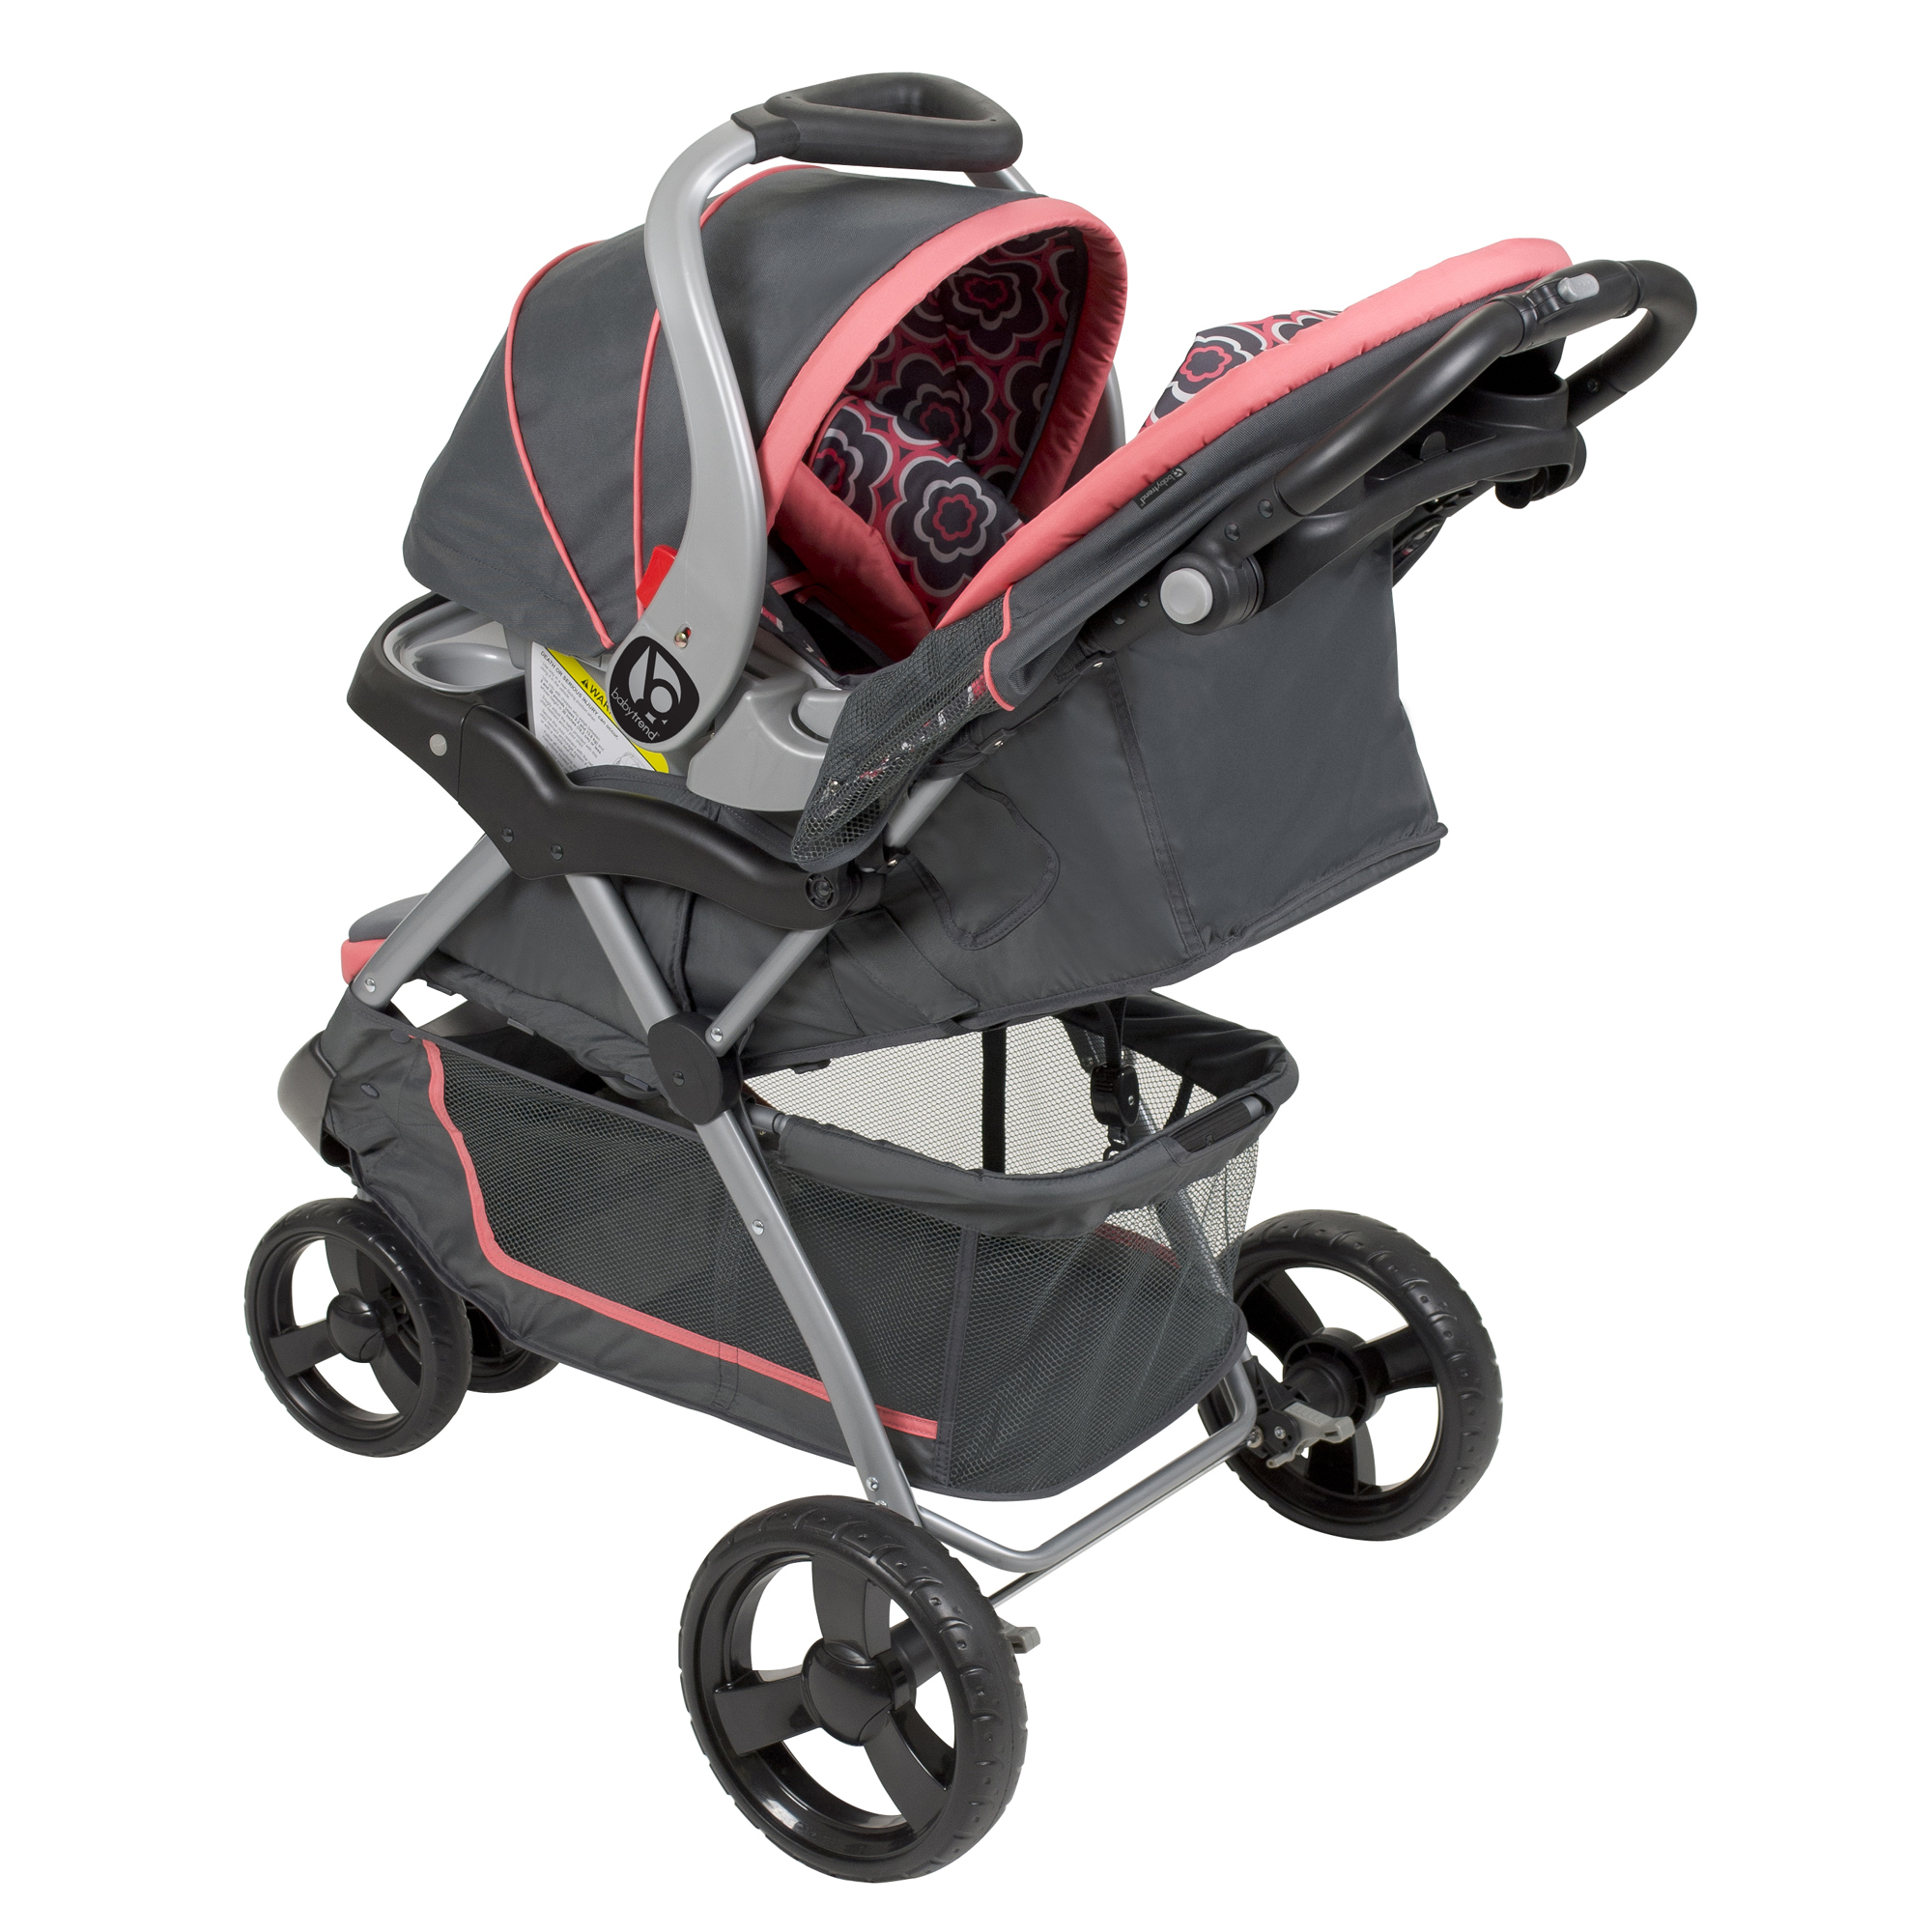 Baby Trend Nexton Travel System Stroller, Coral Floral - image 4 of 7